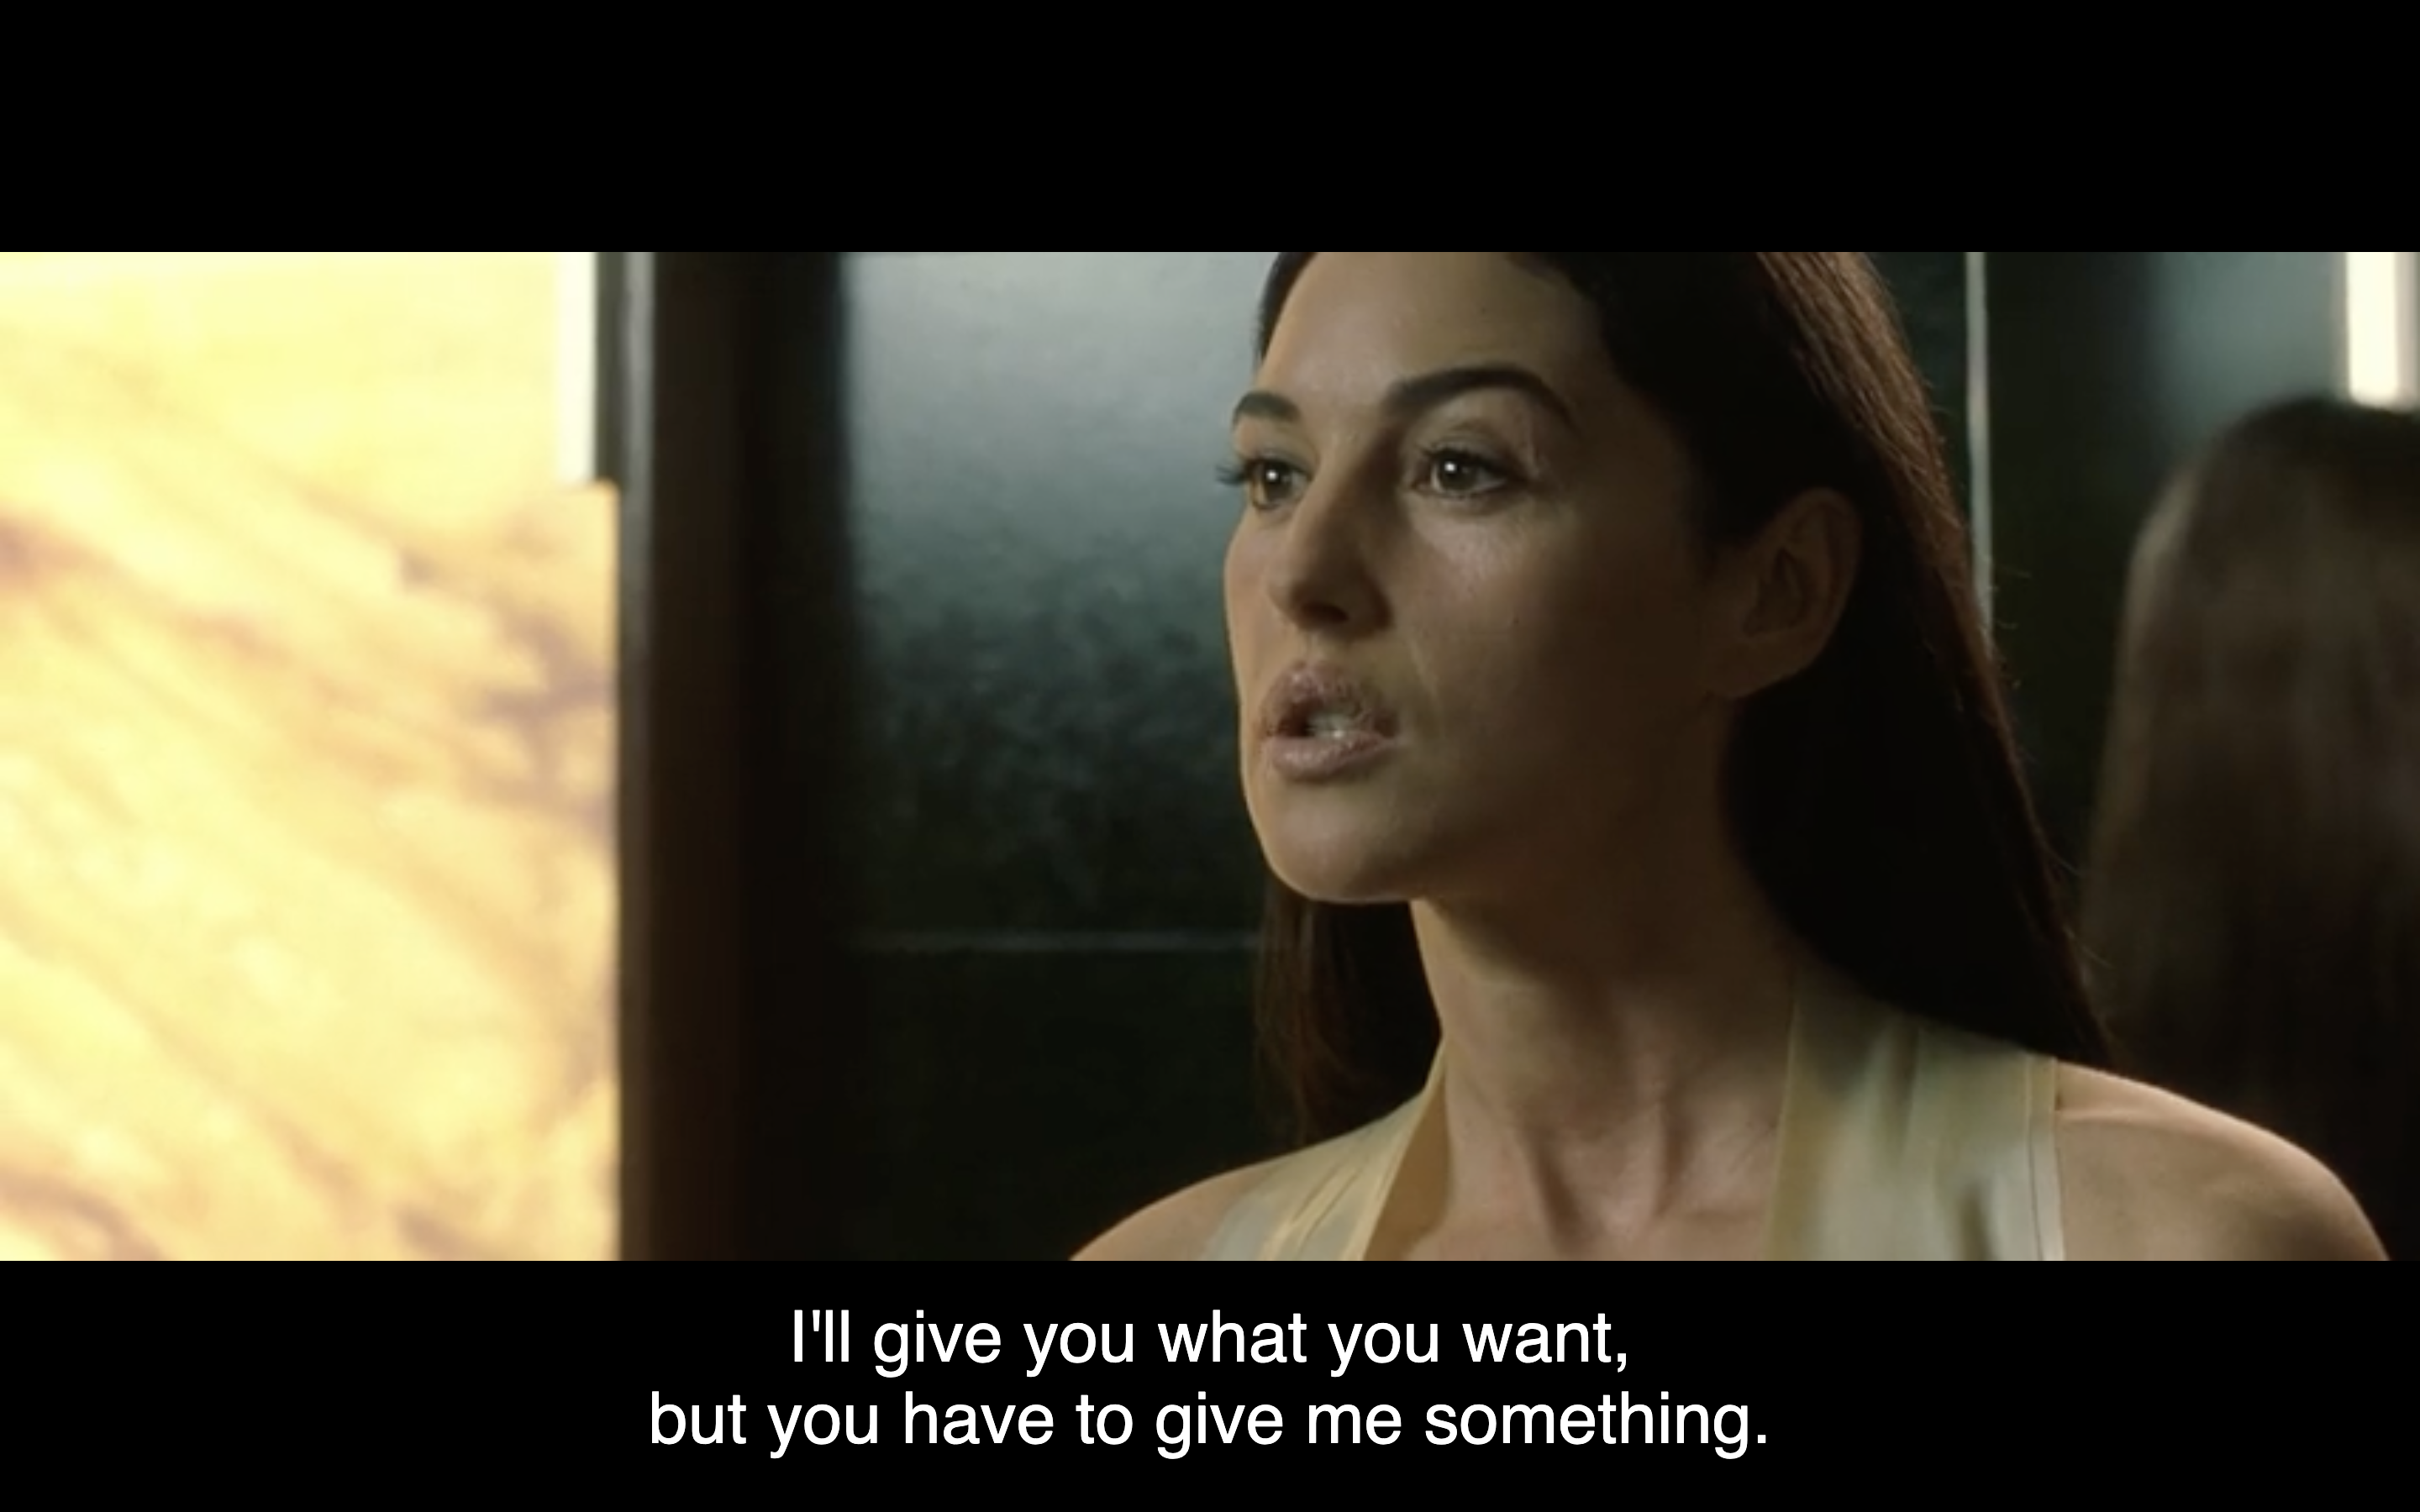 Screenshot of Monica Bellucci, subtitle reads: I'll give you what you want but you have to give me something